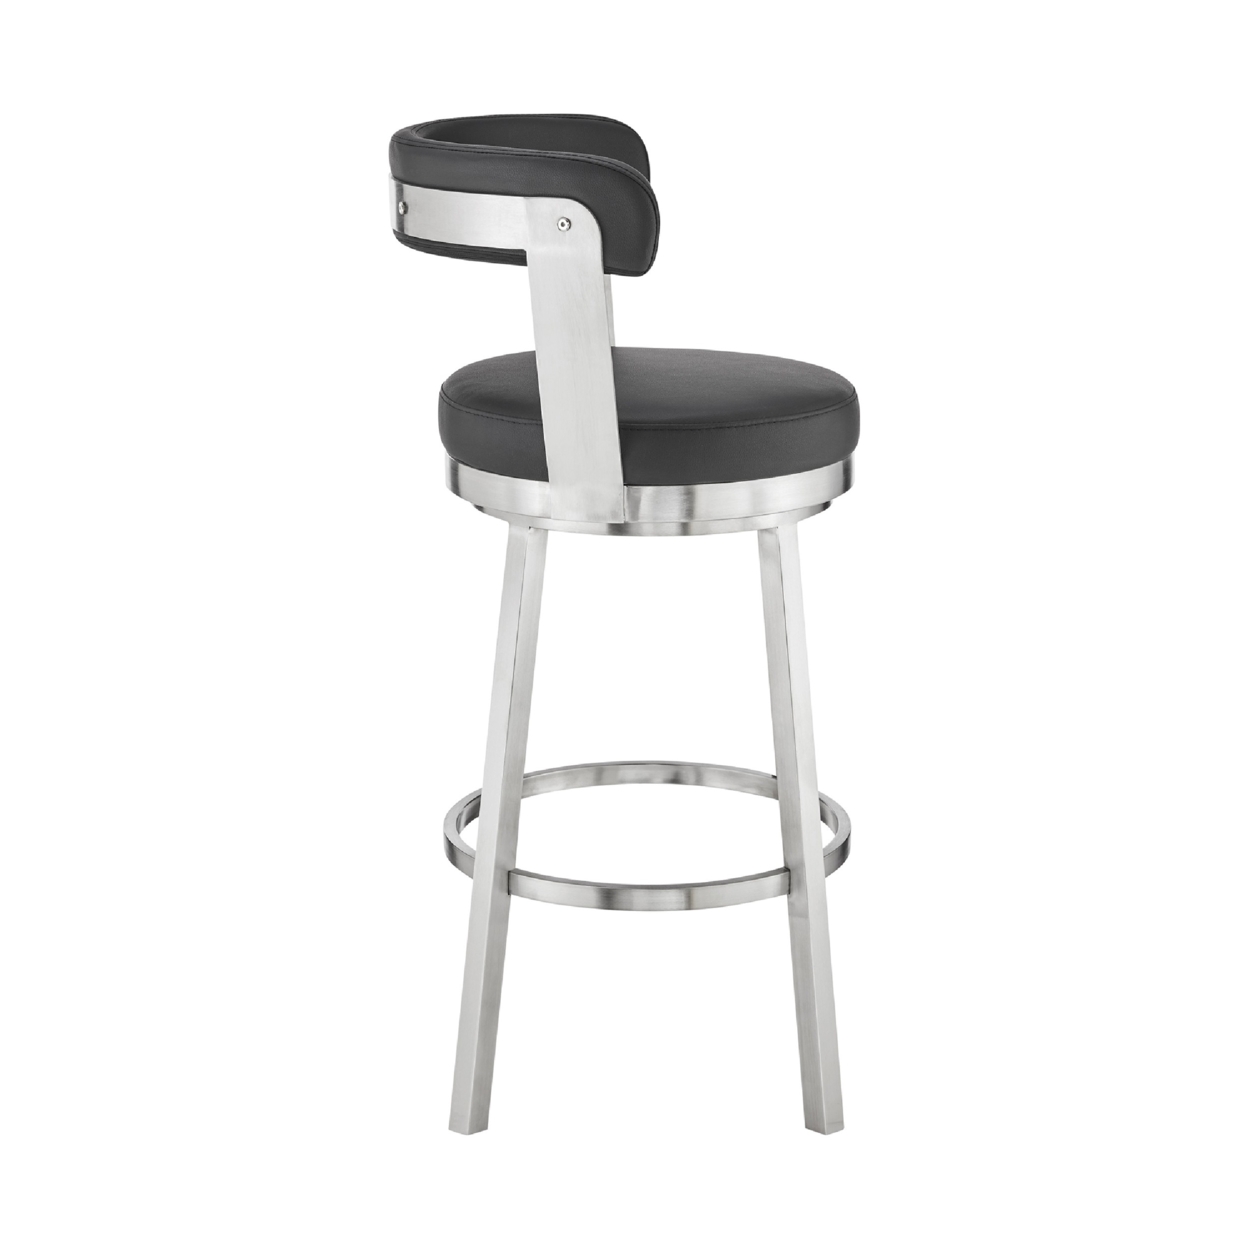 Swivel Counter Barstool With Curved Open Back And Metal Legs, Black And Silver- Saltoro Sherpi